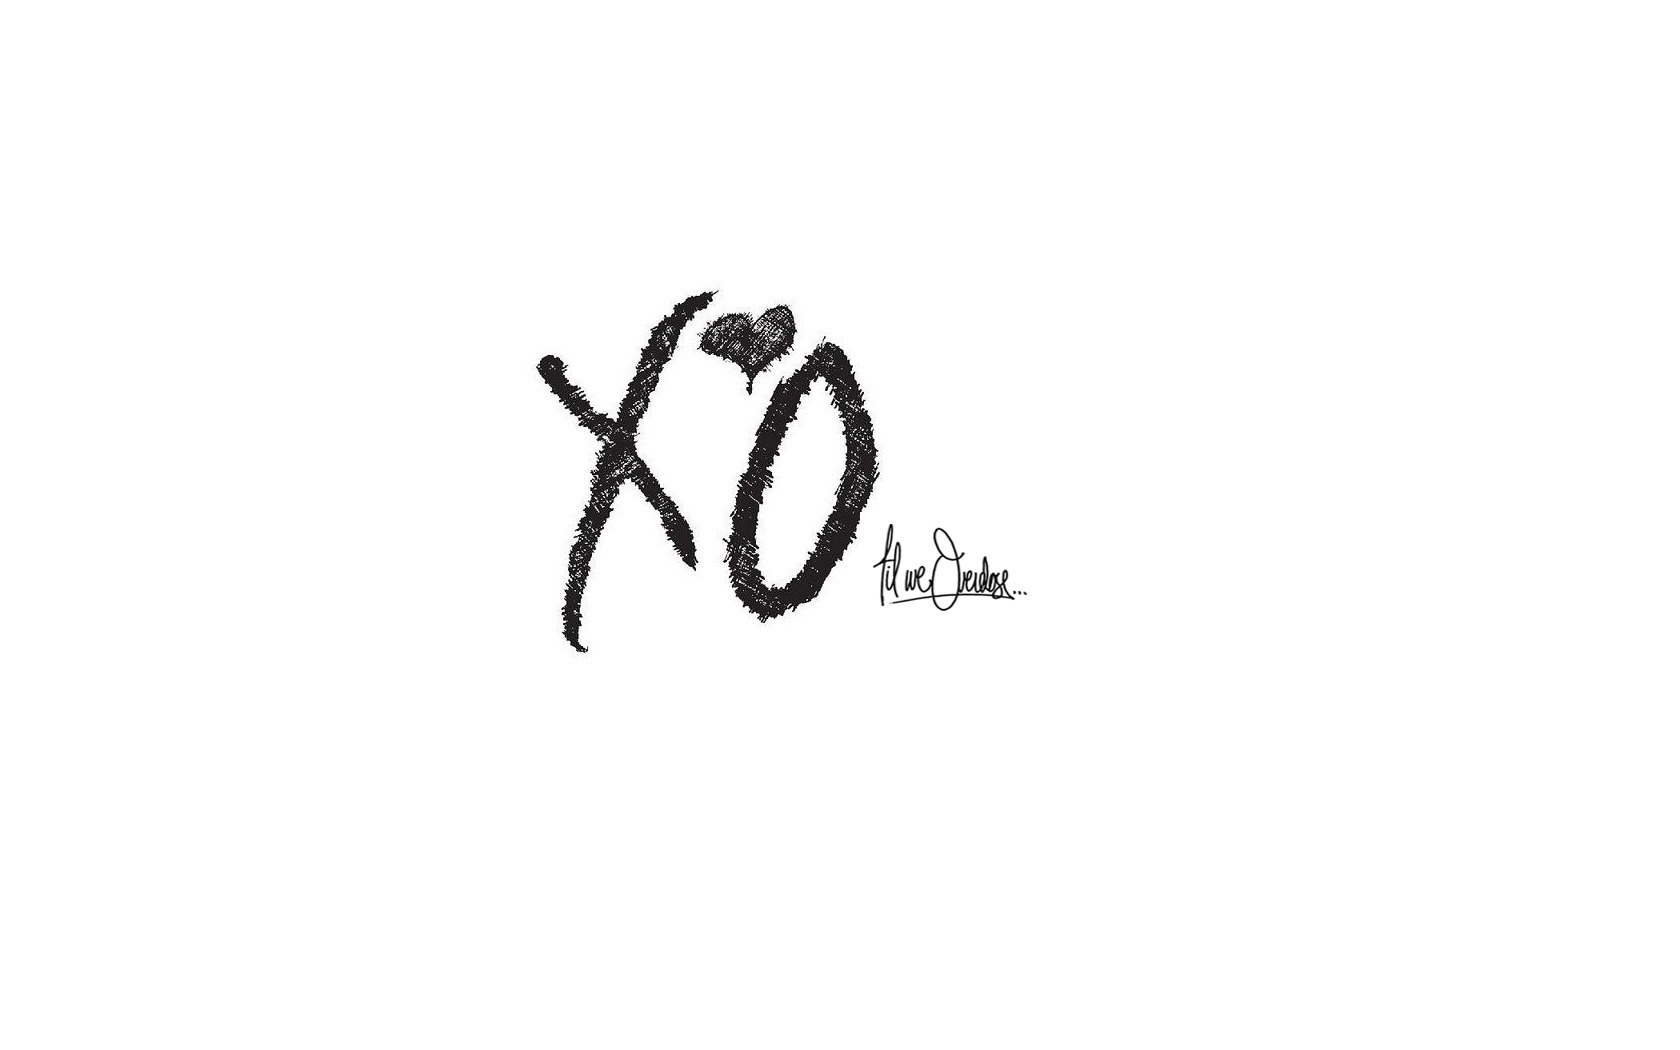 Xo The Weeknd Quotes. QuotesGram1680 x 1050